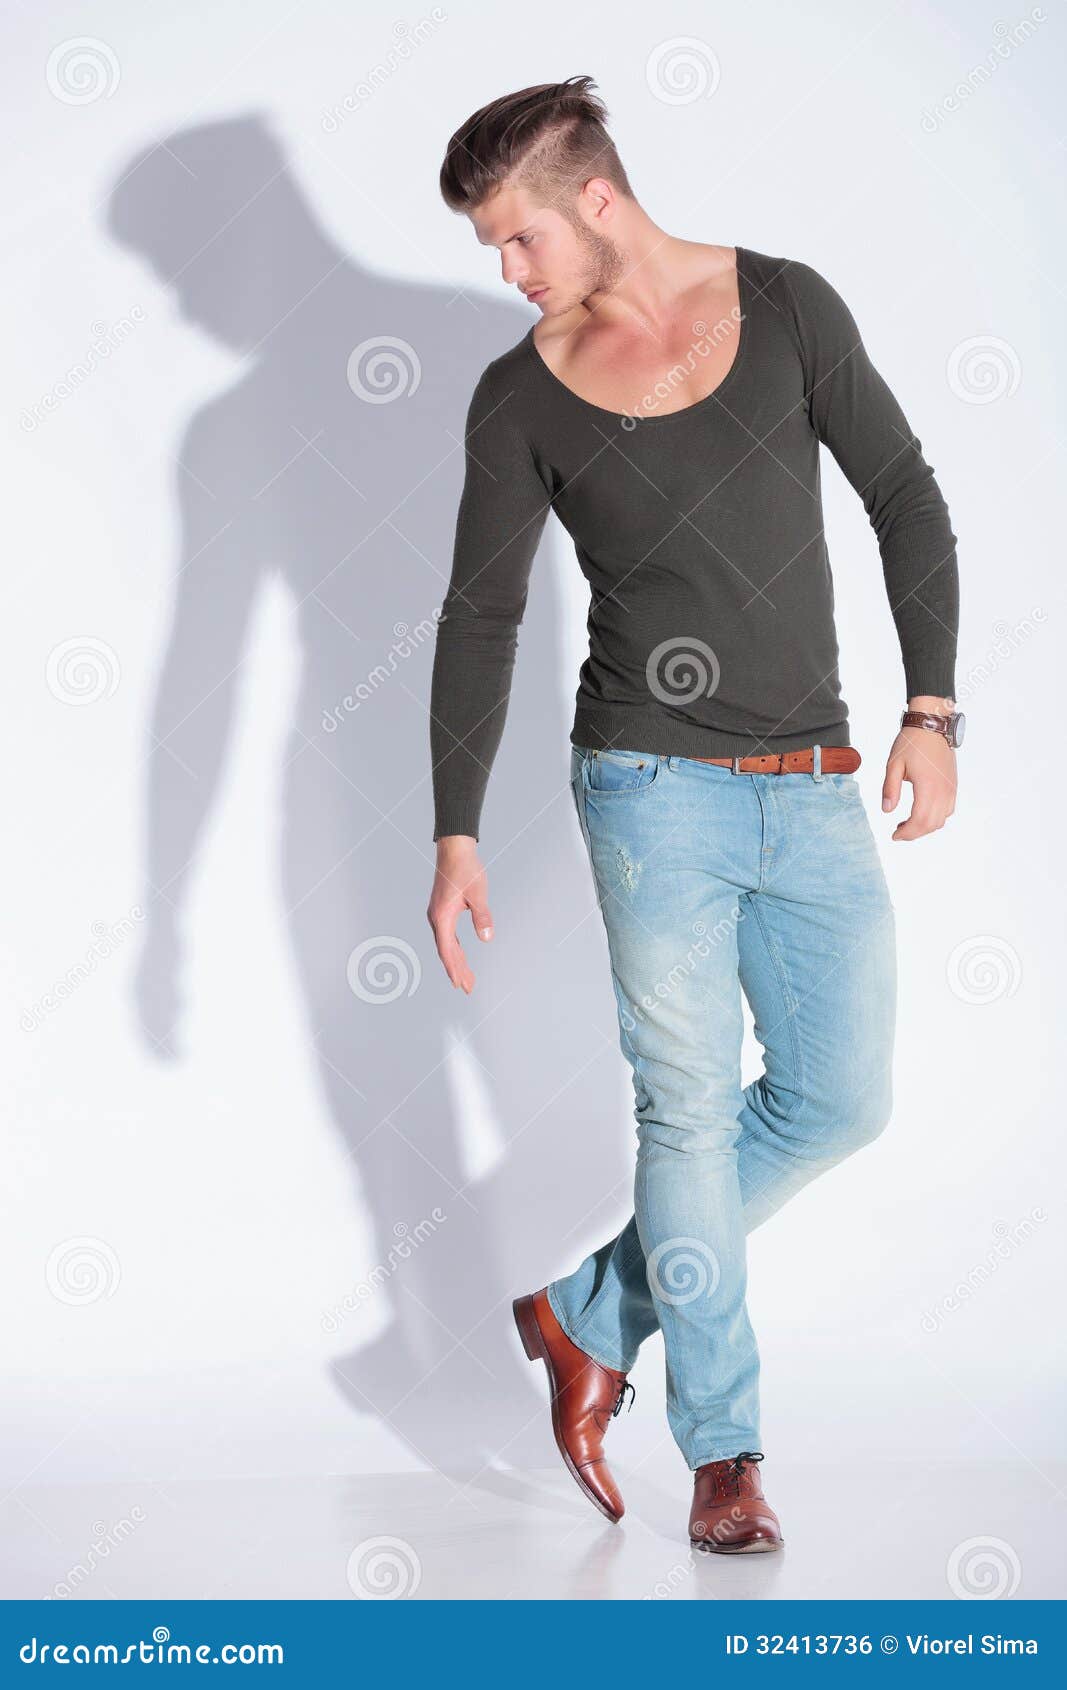 Fit male model posing on dark background stock photo - OFFSET